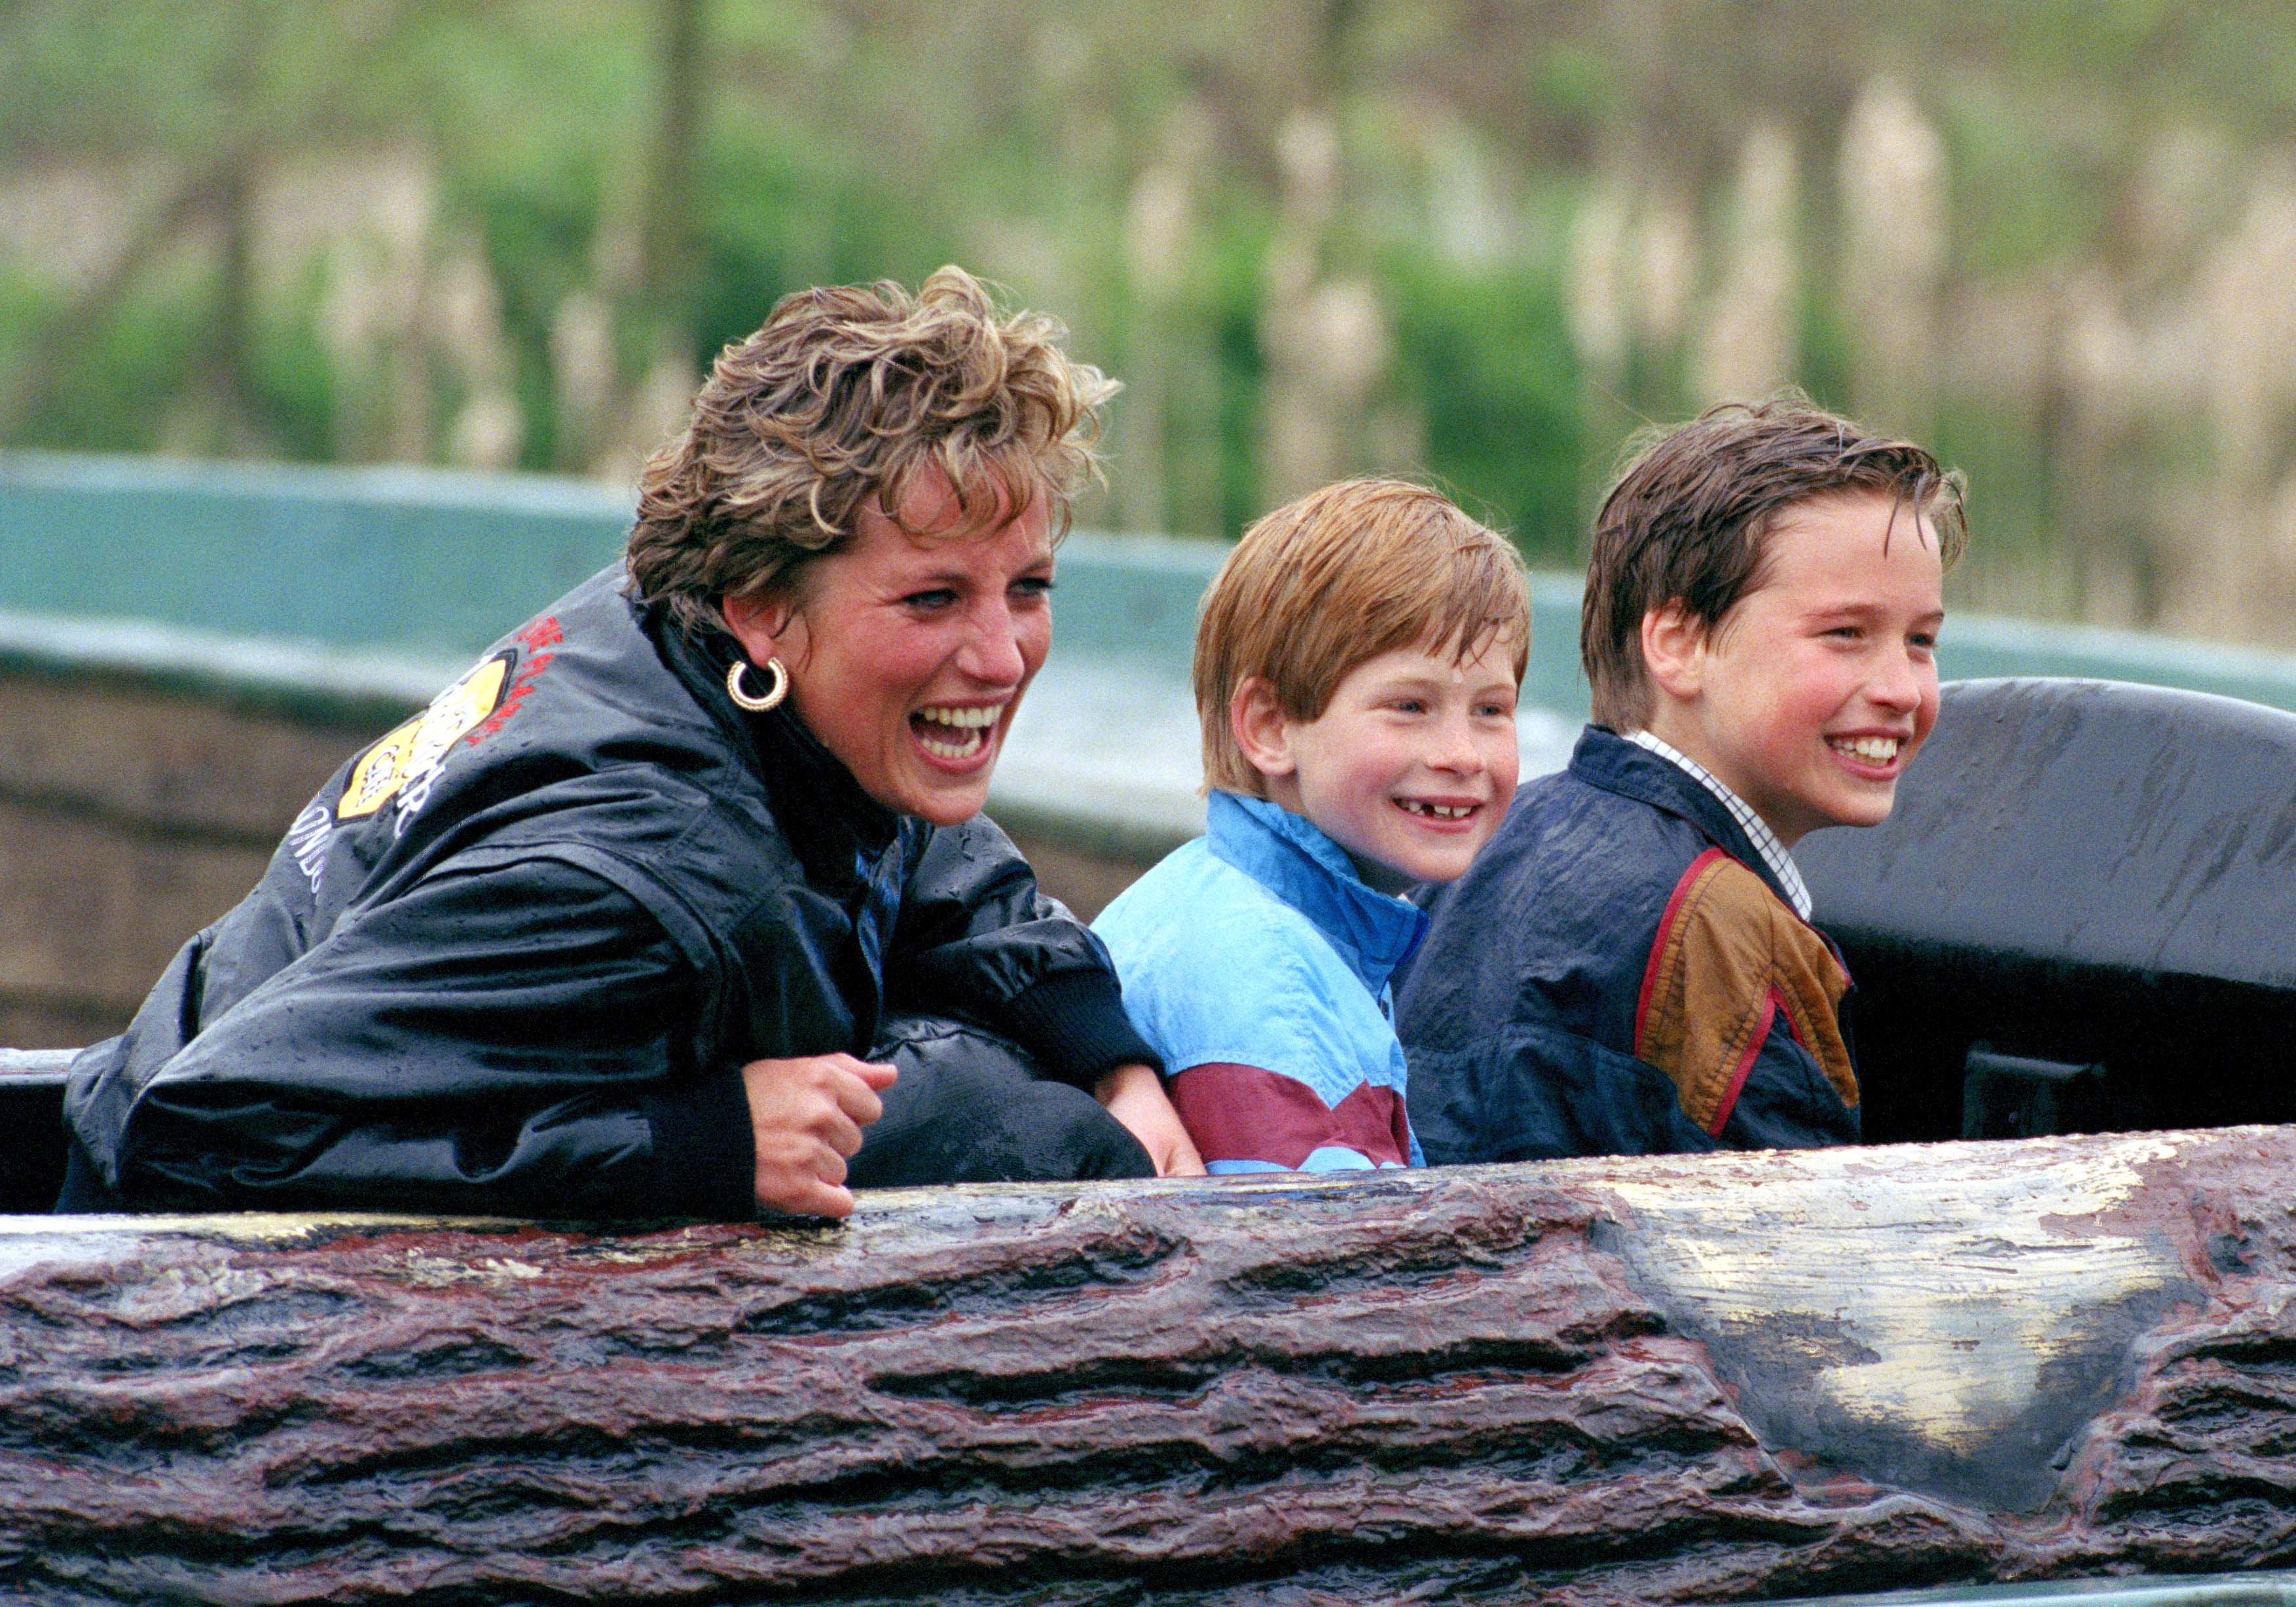 Diana Princess Of Wales, Prince William & Prince Harry Visit The 'Thorpe Park' Amusement Park. | Photo: Getty Images